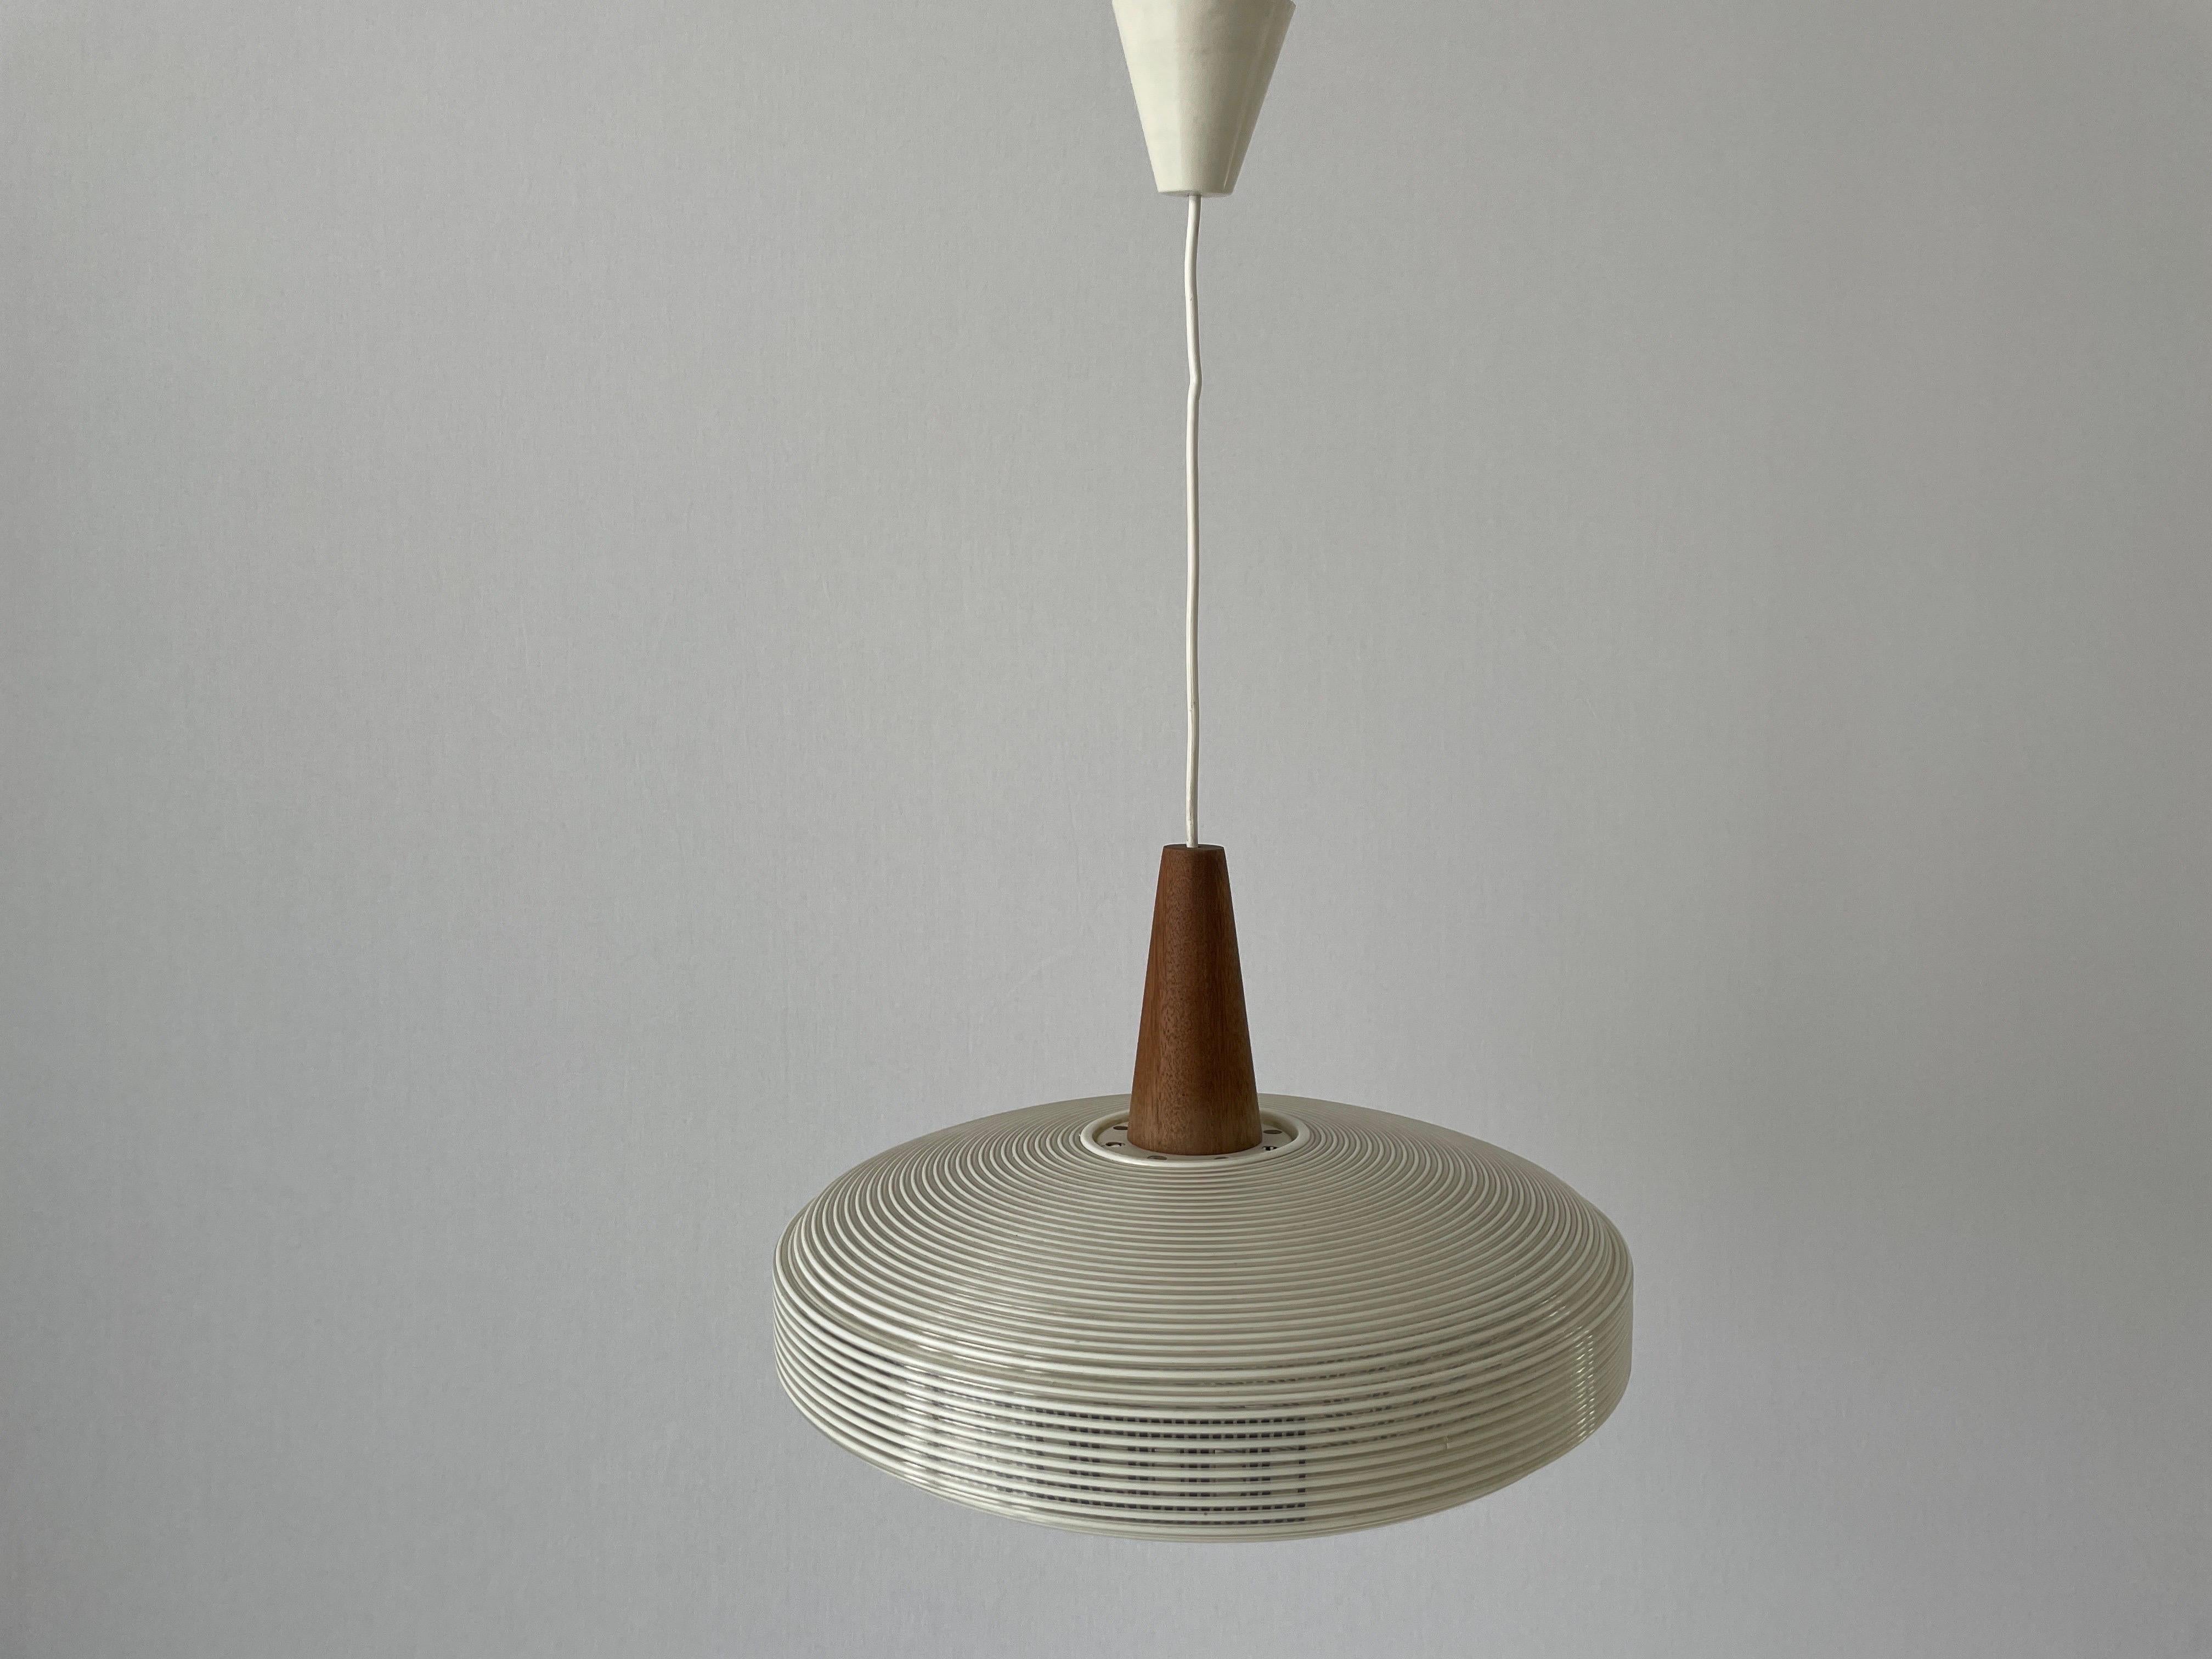 Mid-20th Century Rare Rotaflex Ceiling Lamp by Yasha Heifetz with Teak Detail, 1960s Germany For Sale